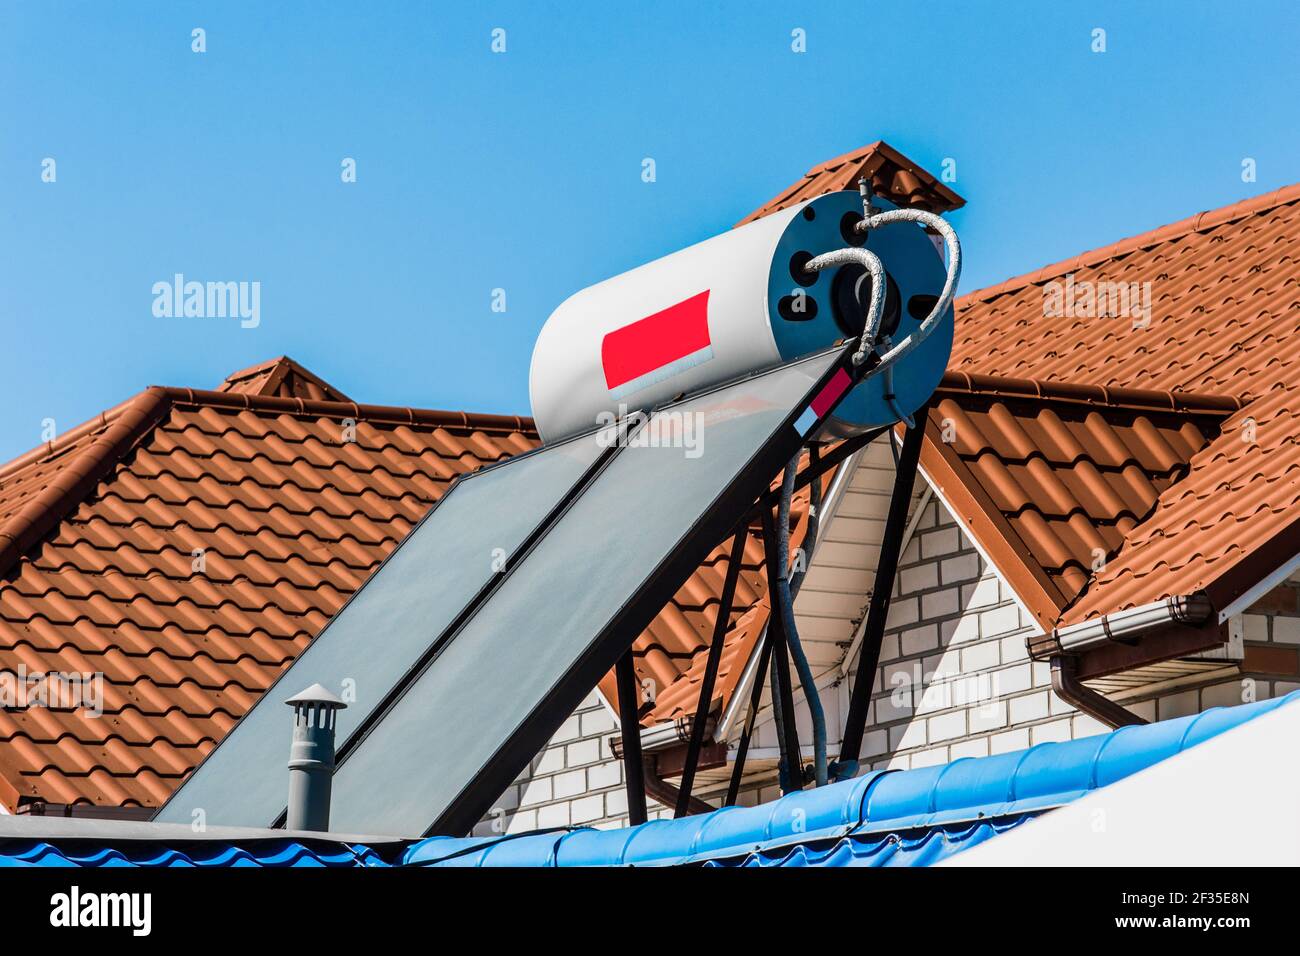 Solar water heater on the roof of a building against the background of the sky. Using solar energy to heat water. Stock Photo